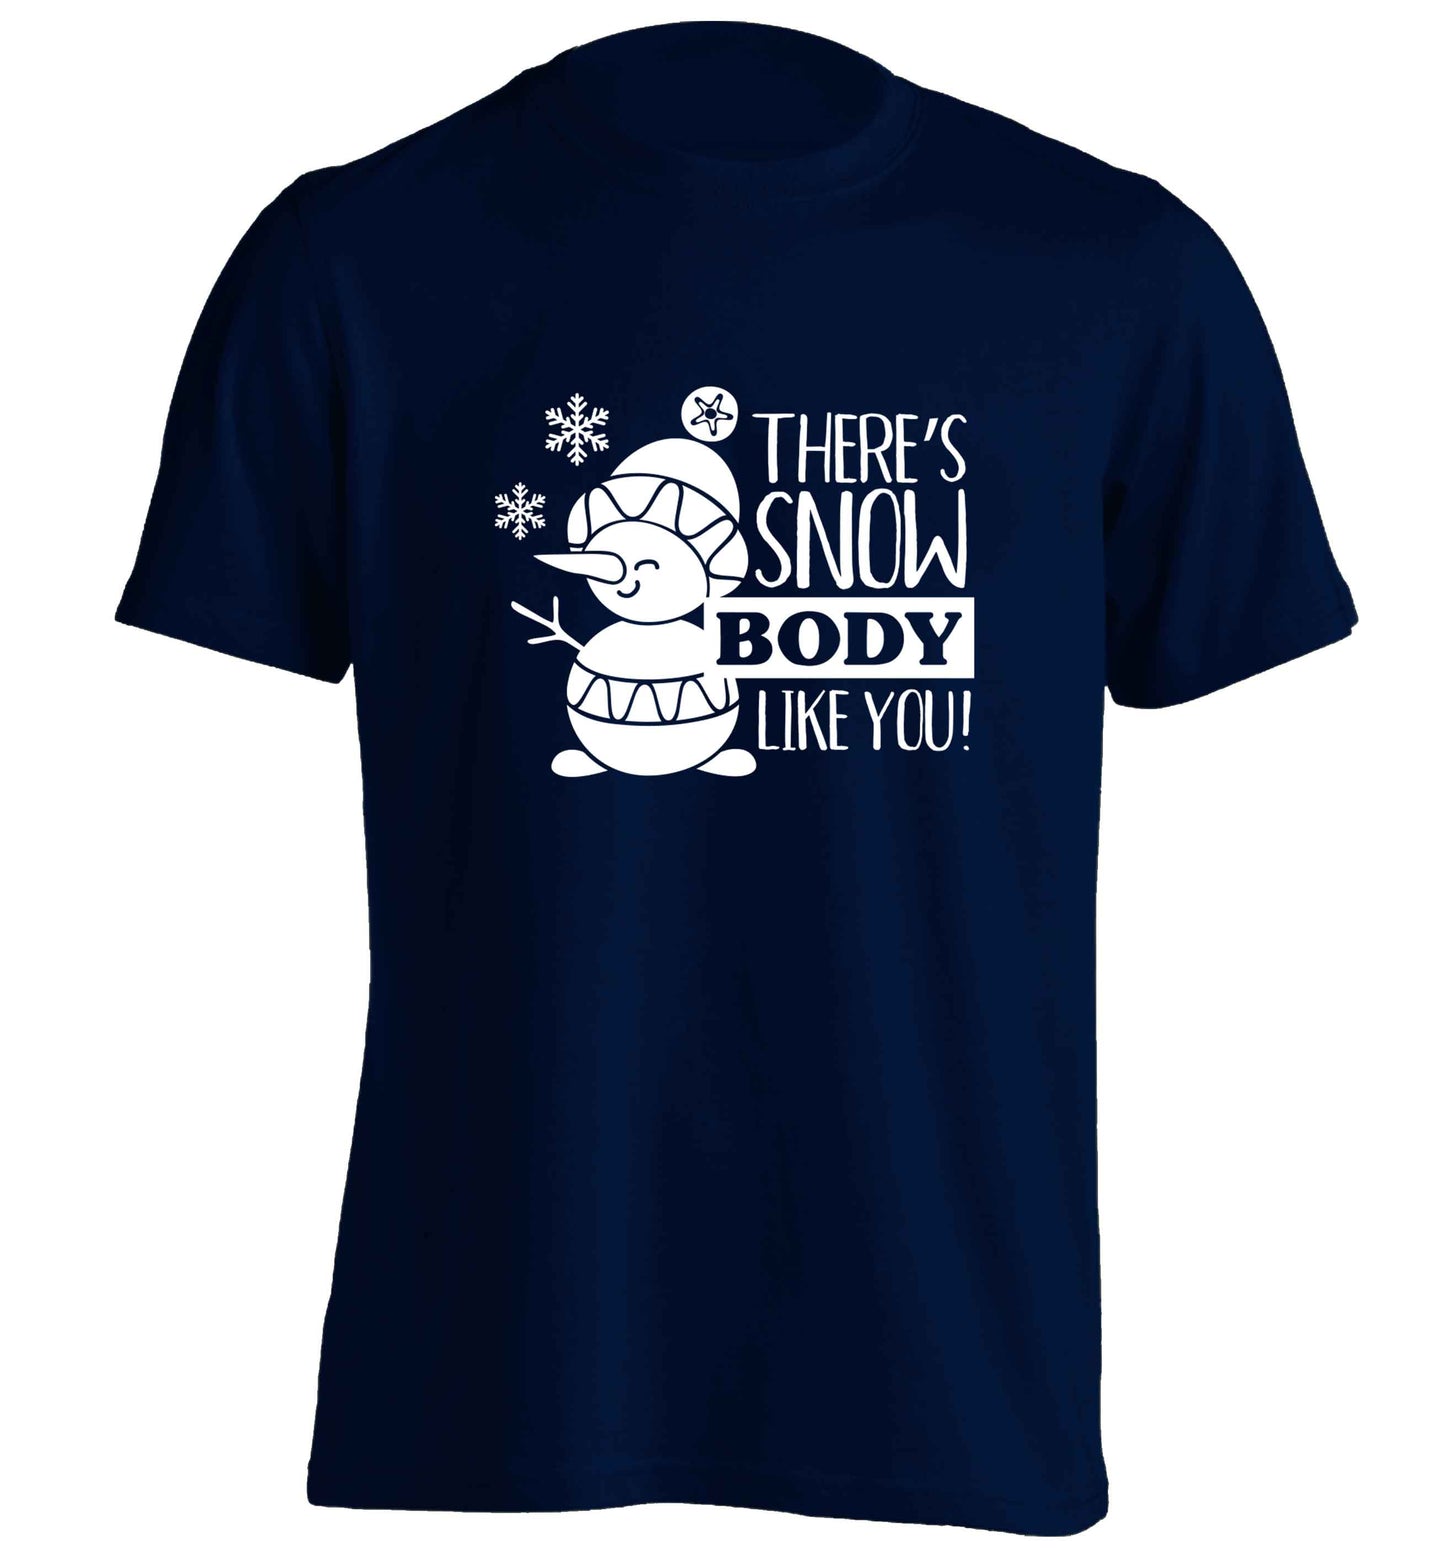 There's snow body like you adults unisex navy Tshirt 2XL